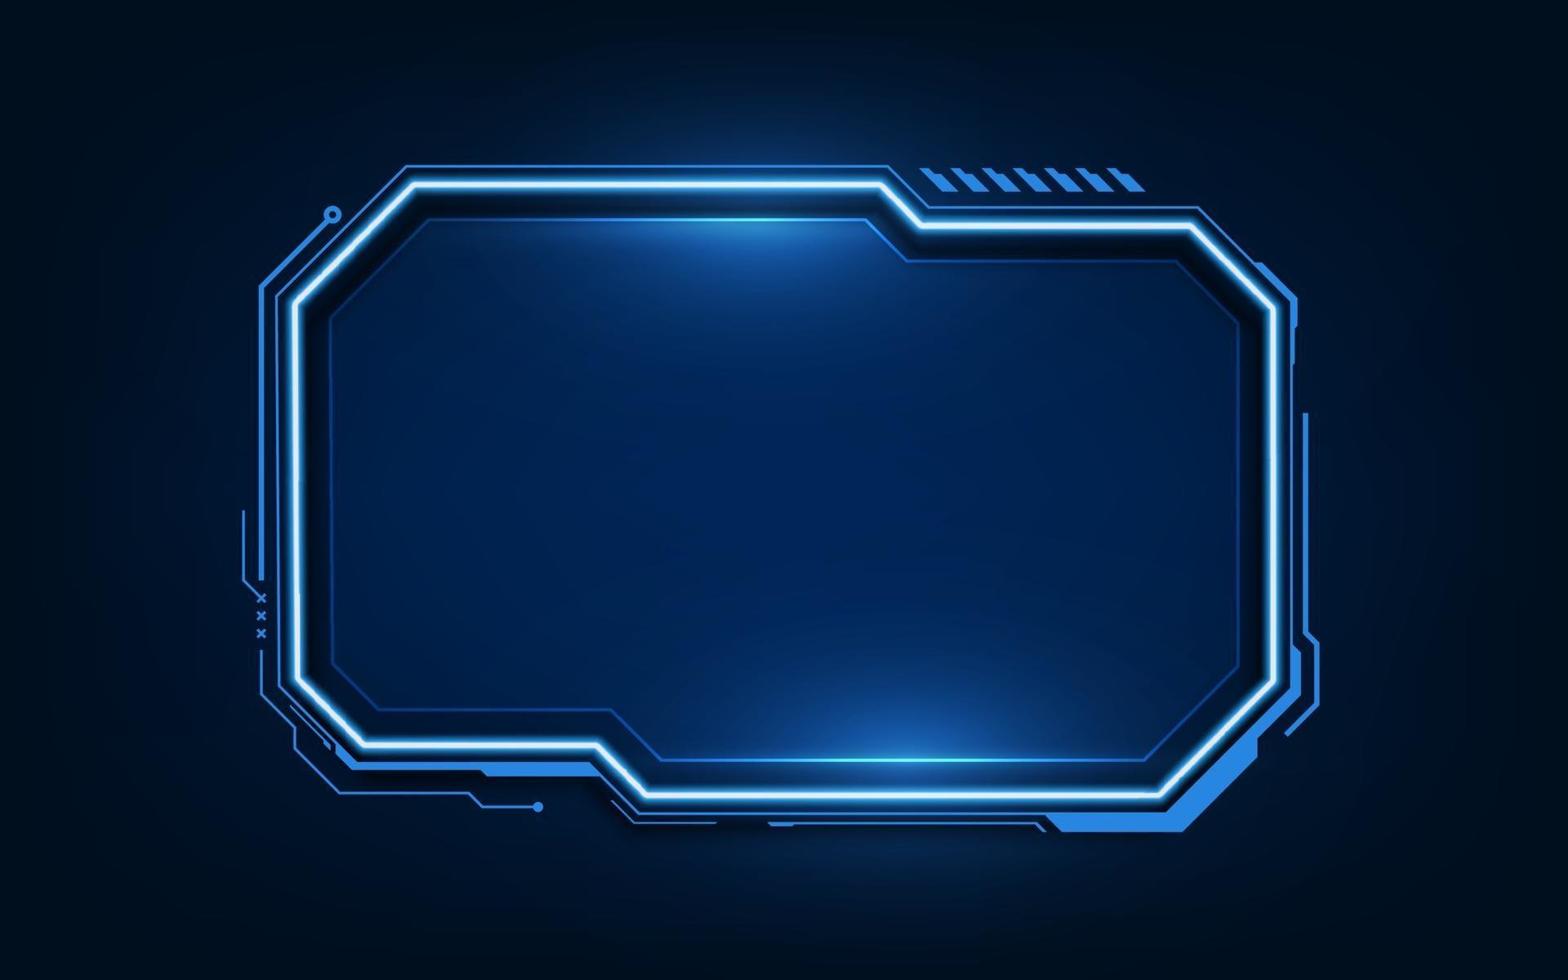 Sci Fi HUD modern futuristic user interface Technology background with HUD dashboard interface. vector